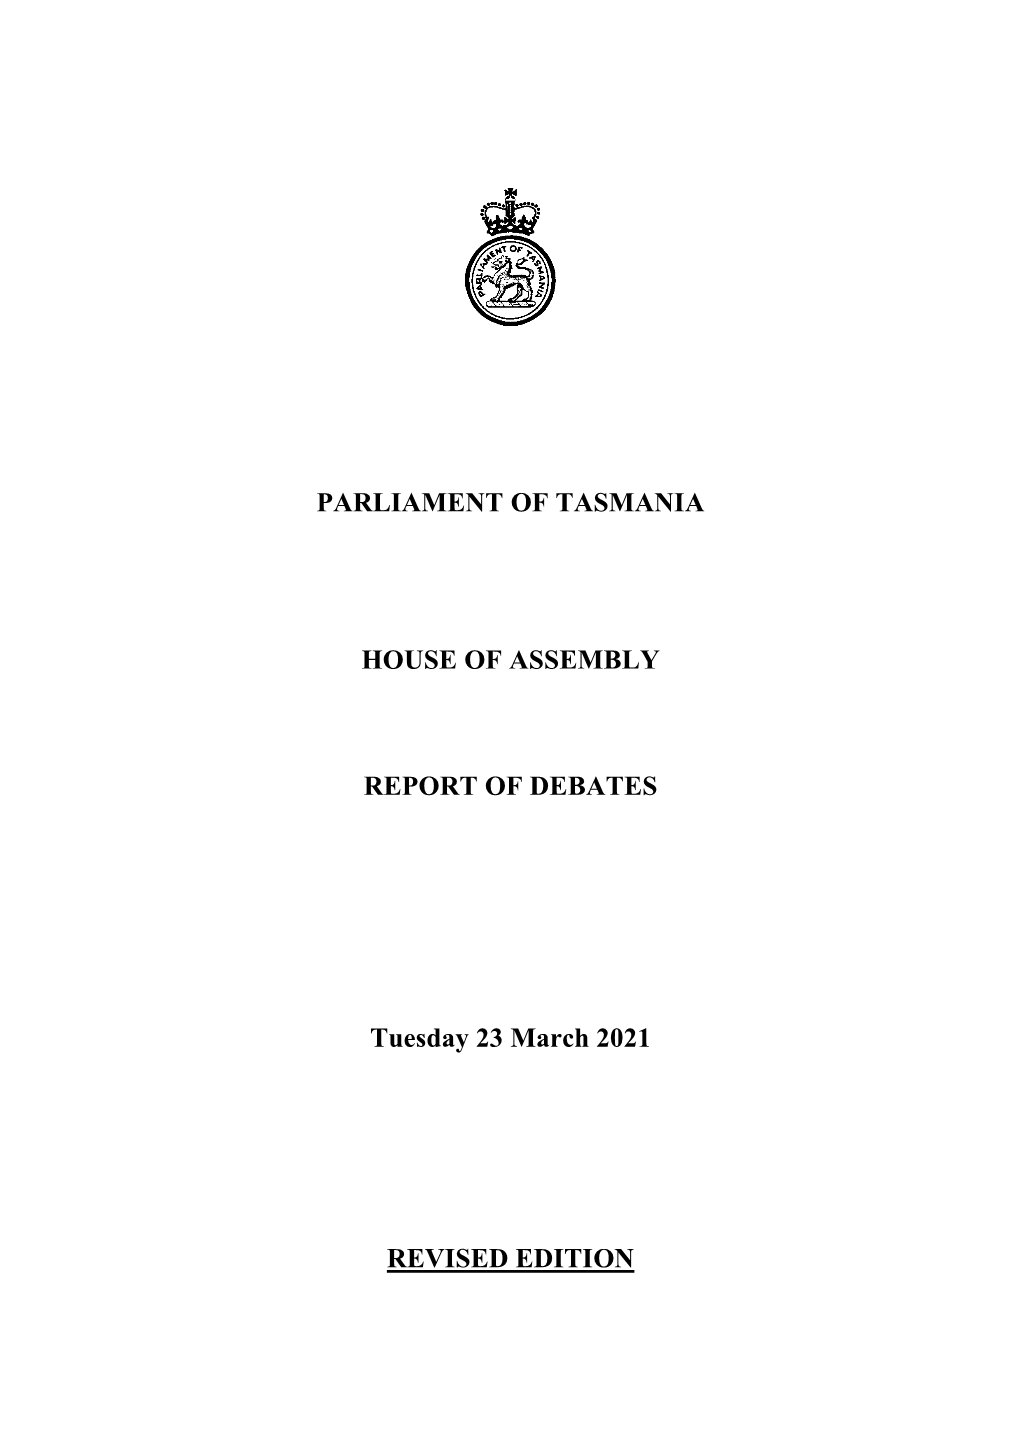 House of Assembly Tuesday 23 March 2021